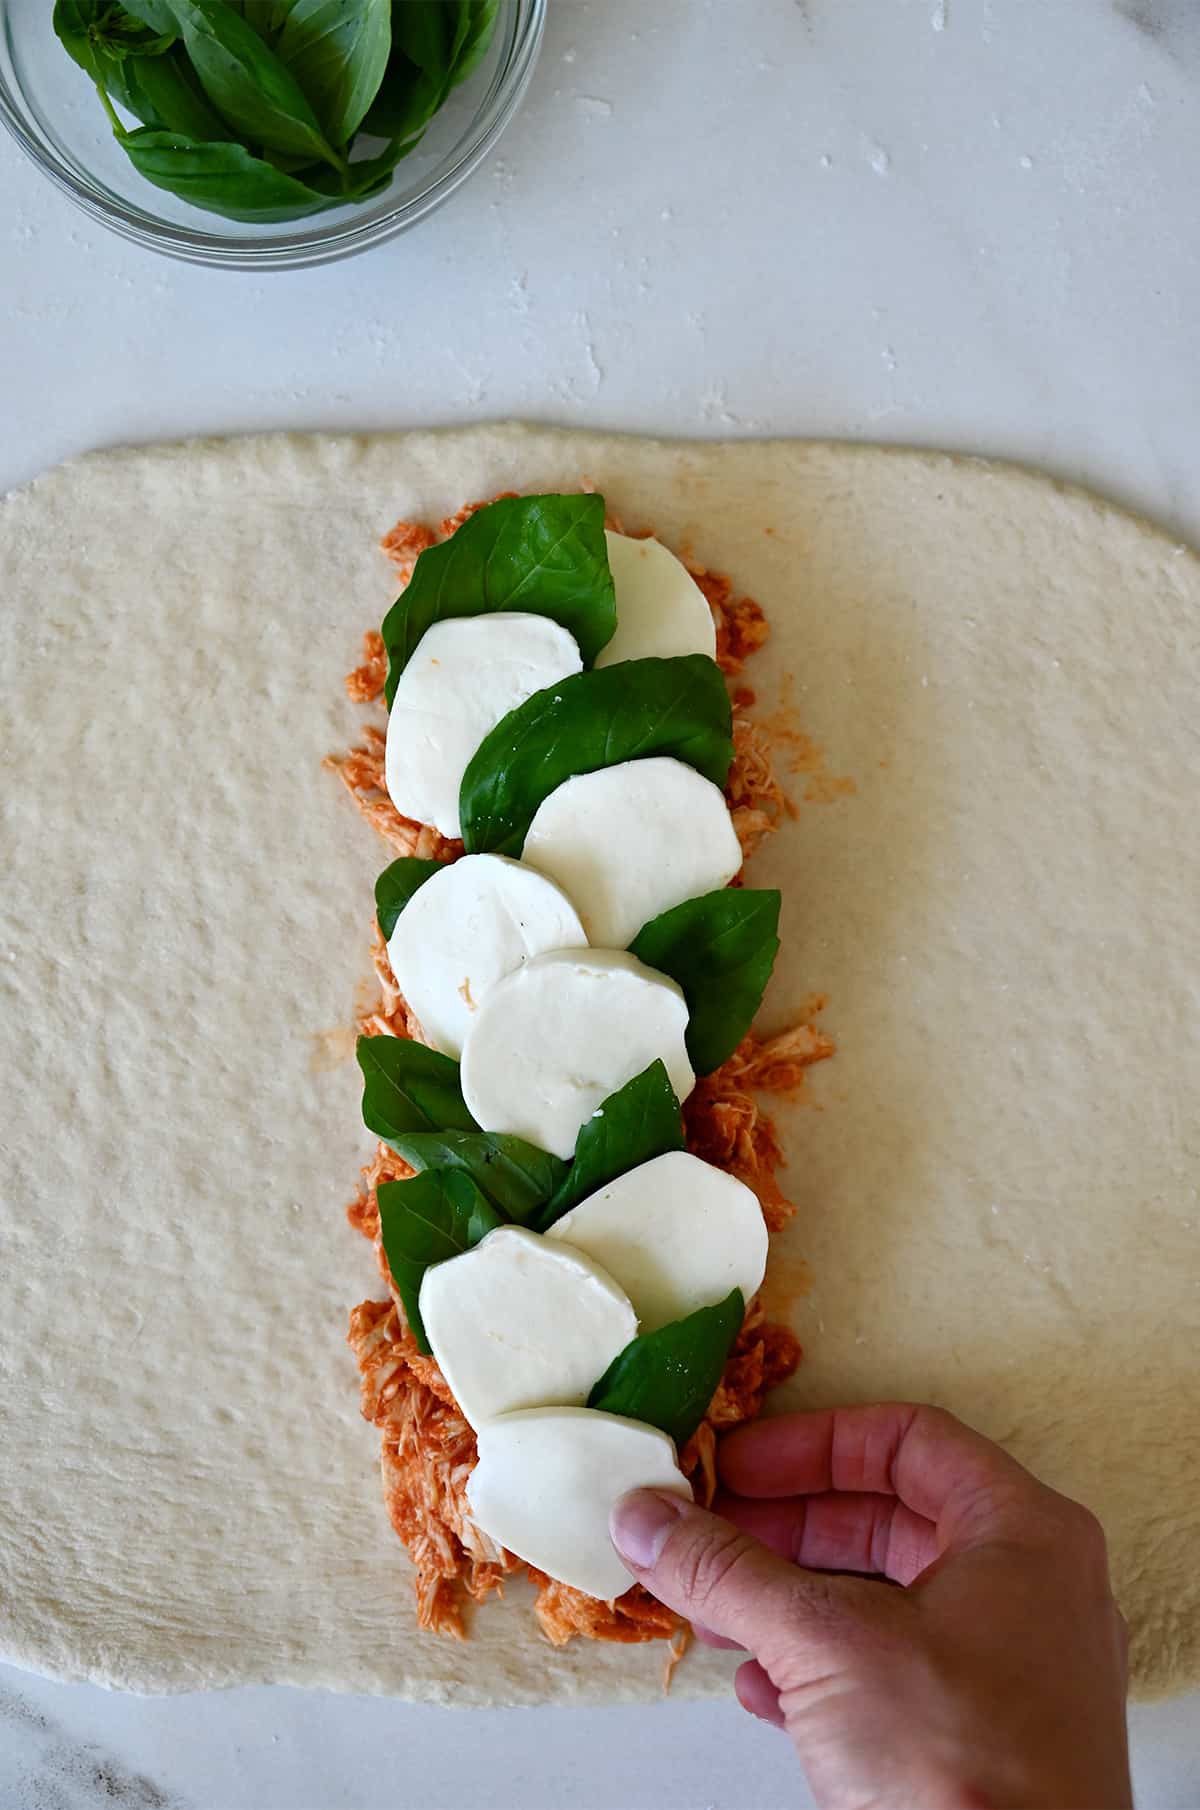 Pizza dough topped with shredded chicken, mozzarella slices and basil leaves.